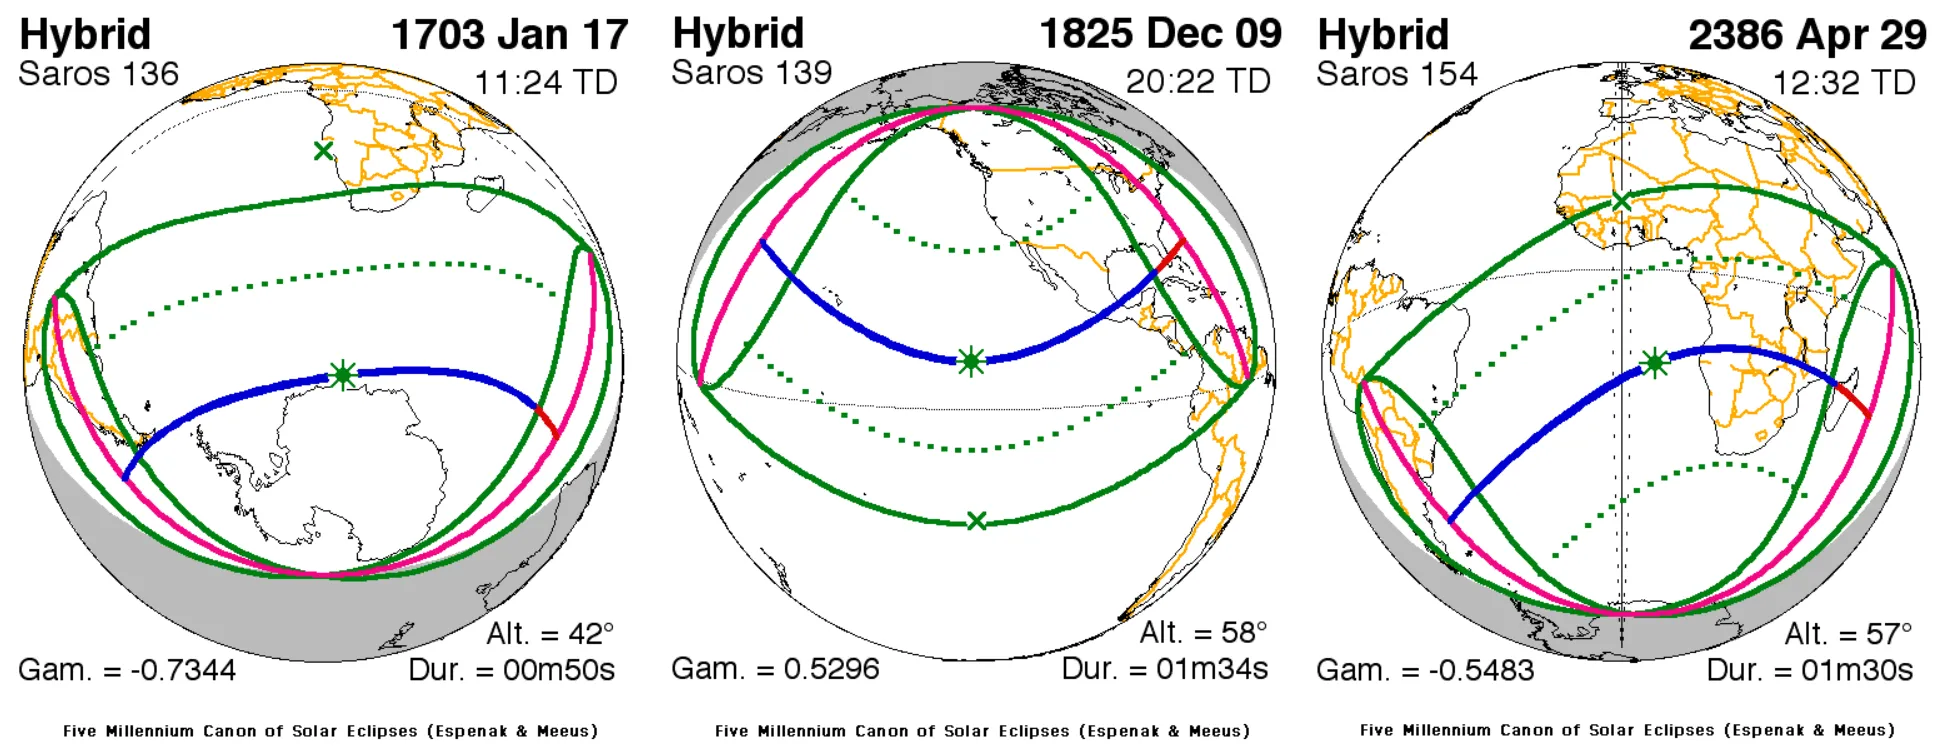 T-A hybrid solar eclipse 1825 and others